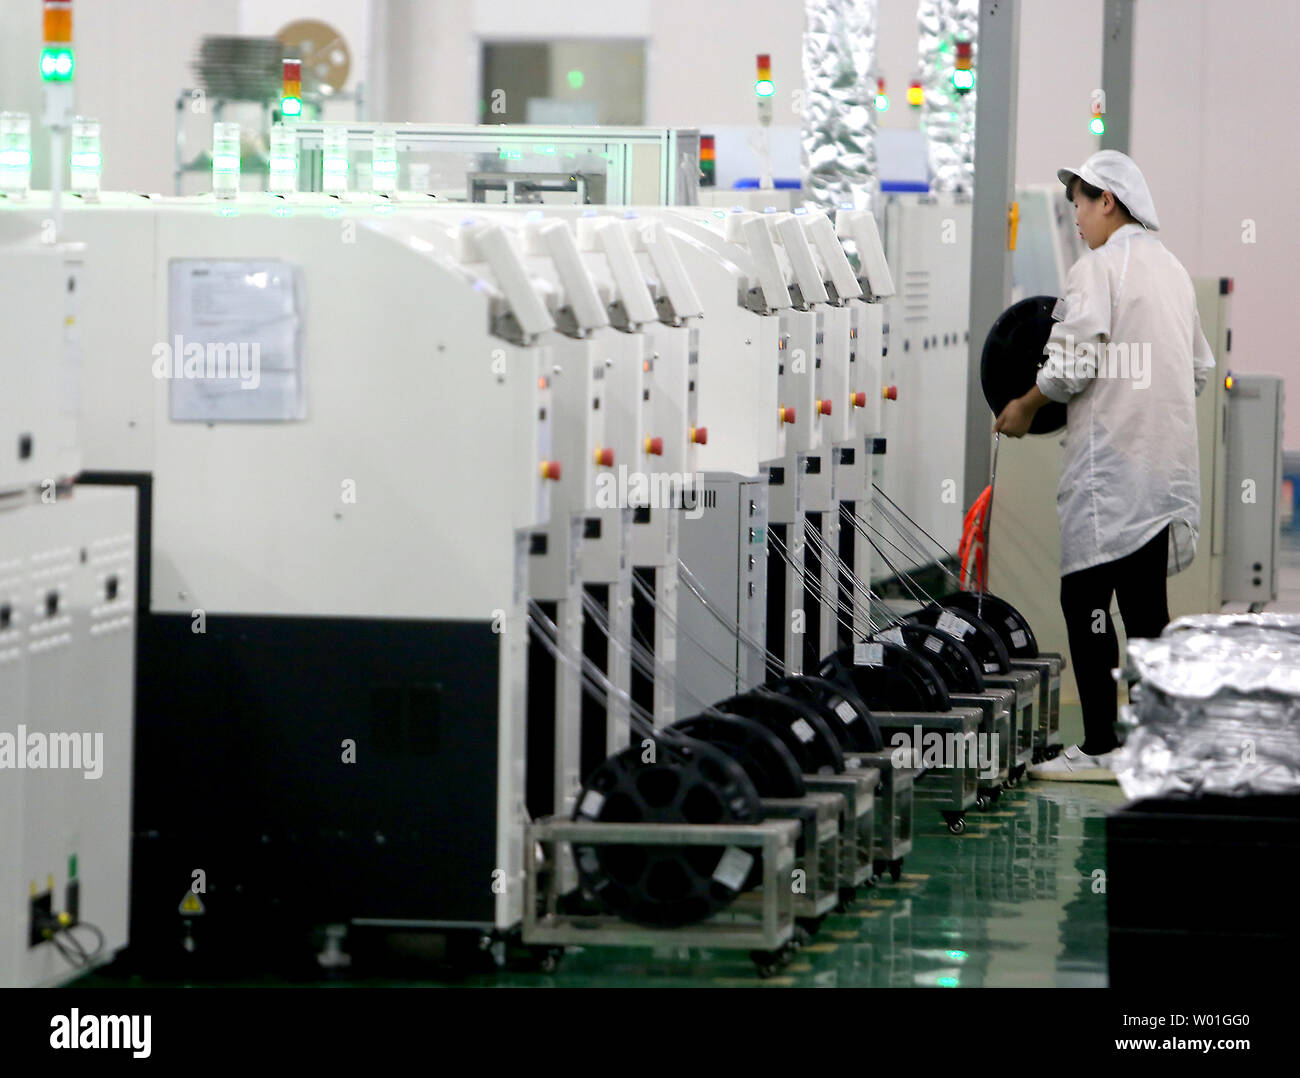 Chinese work at the Shanxi high-tech Huaye Electronic Group's factory in Taiyuan, Shanxi Province, on December 30, 2018.  Huaye specializes in manufacturing and exporting LED displays.    Photo by Stephen Shaver/UPI Stock Photo